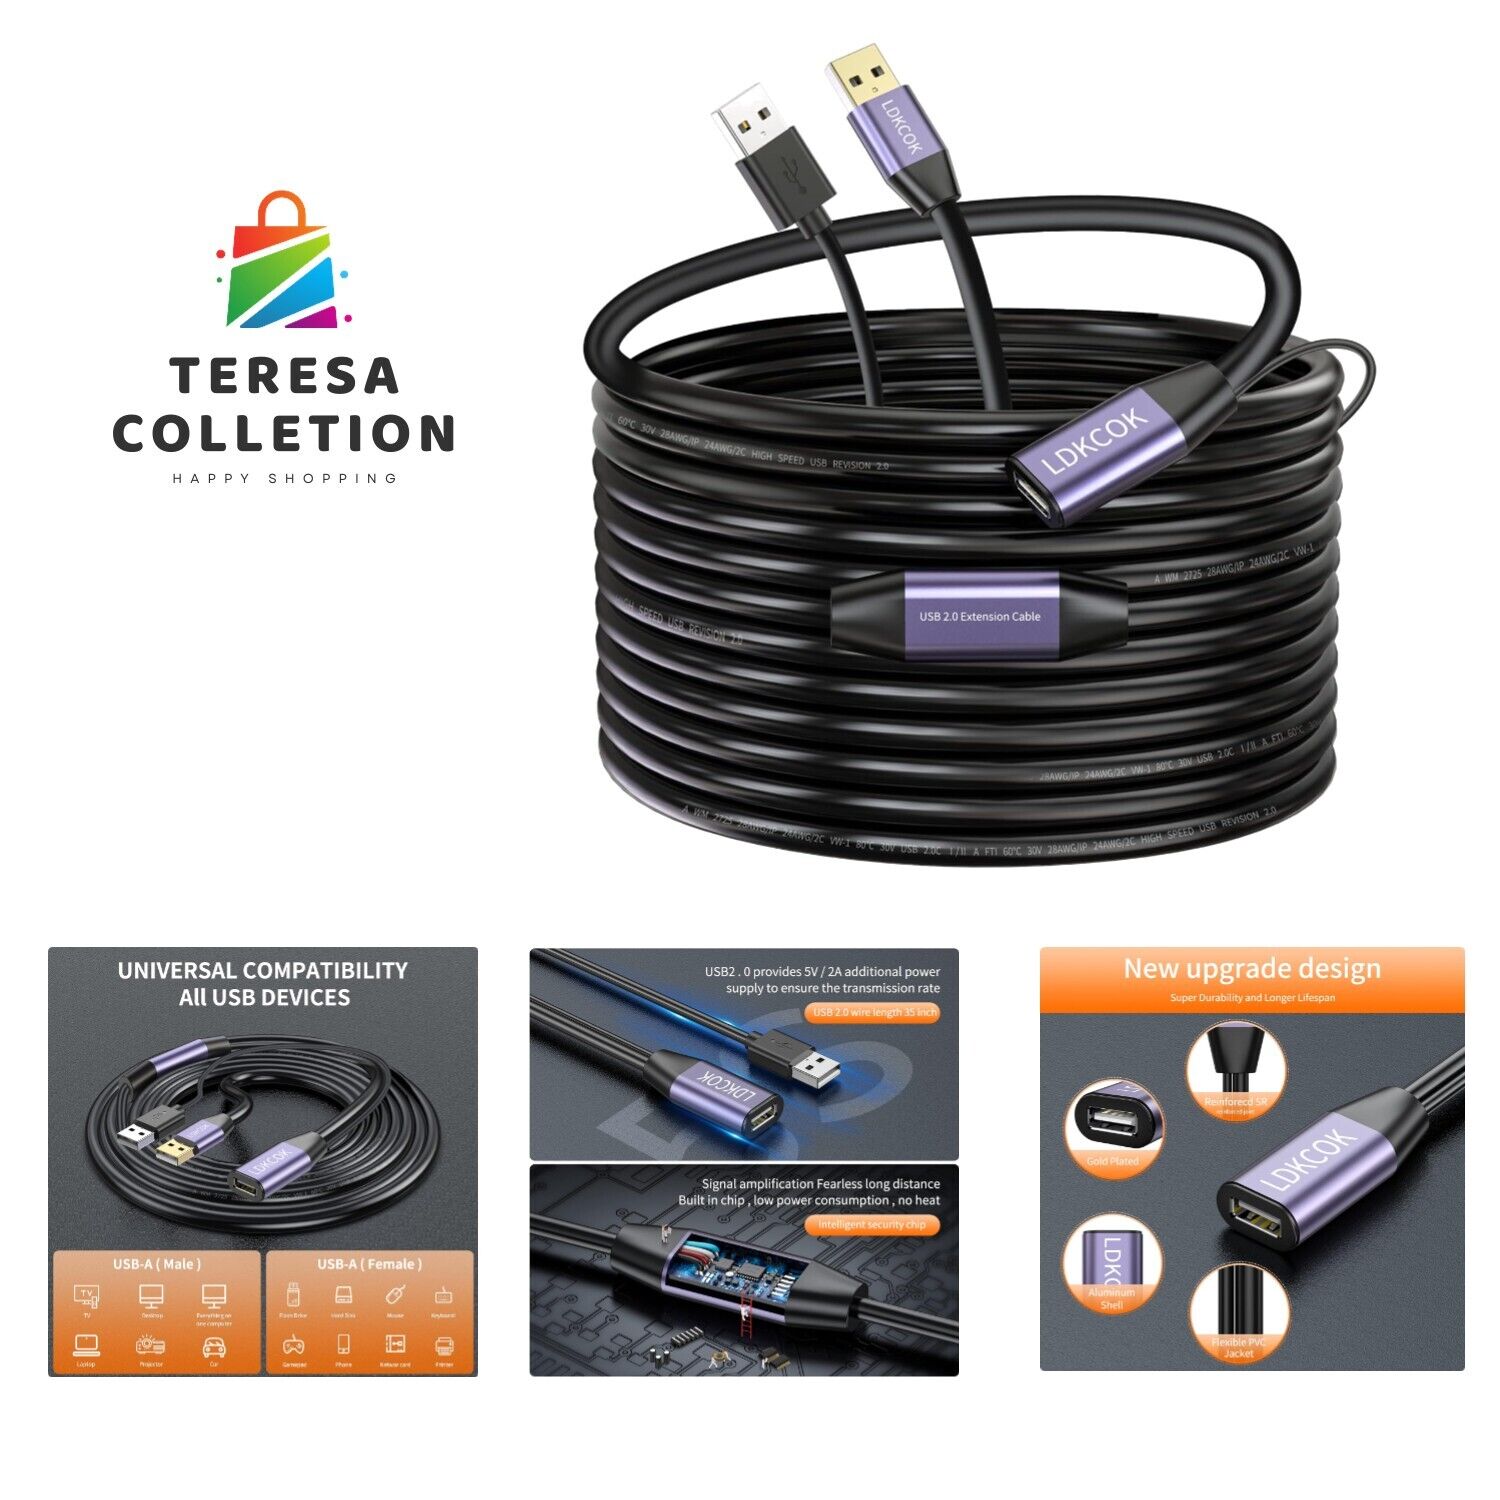 High-Performance USB Cable - 480 Mbps Data Transfer - Professional Quality